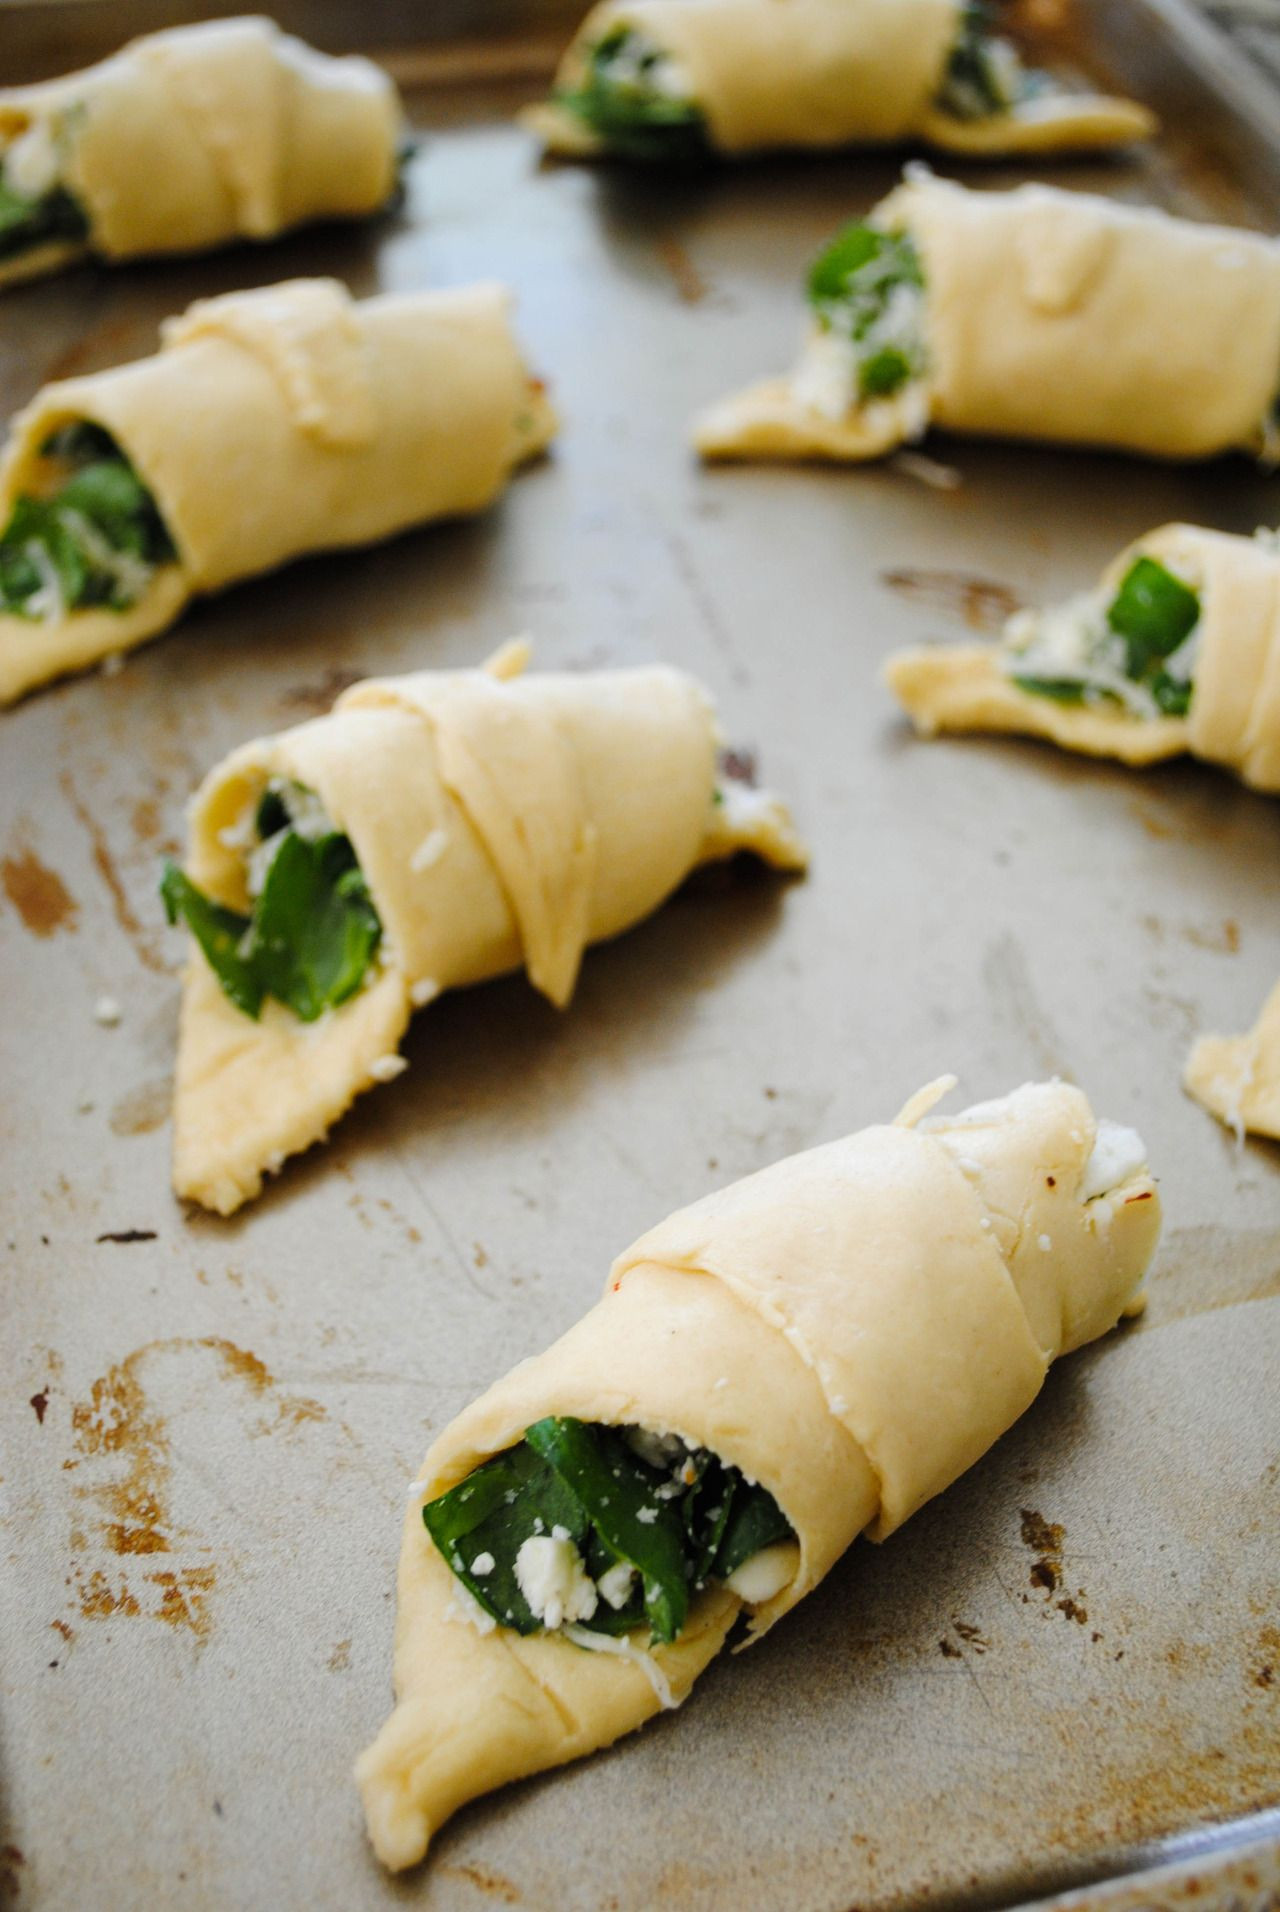 Pillsbury Appetizer Recipes With Crescent Rolls
 Cheese and spinach rolls using Pillsbury crescent dough